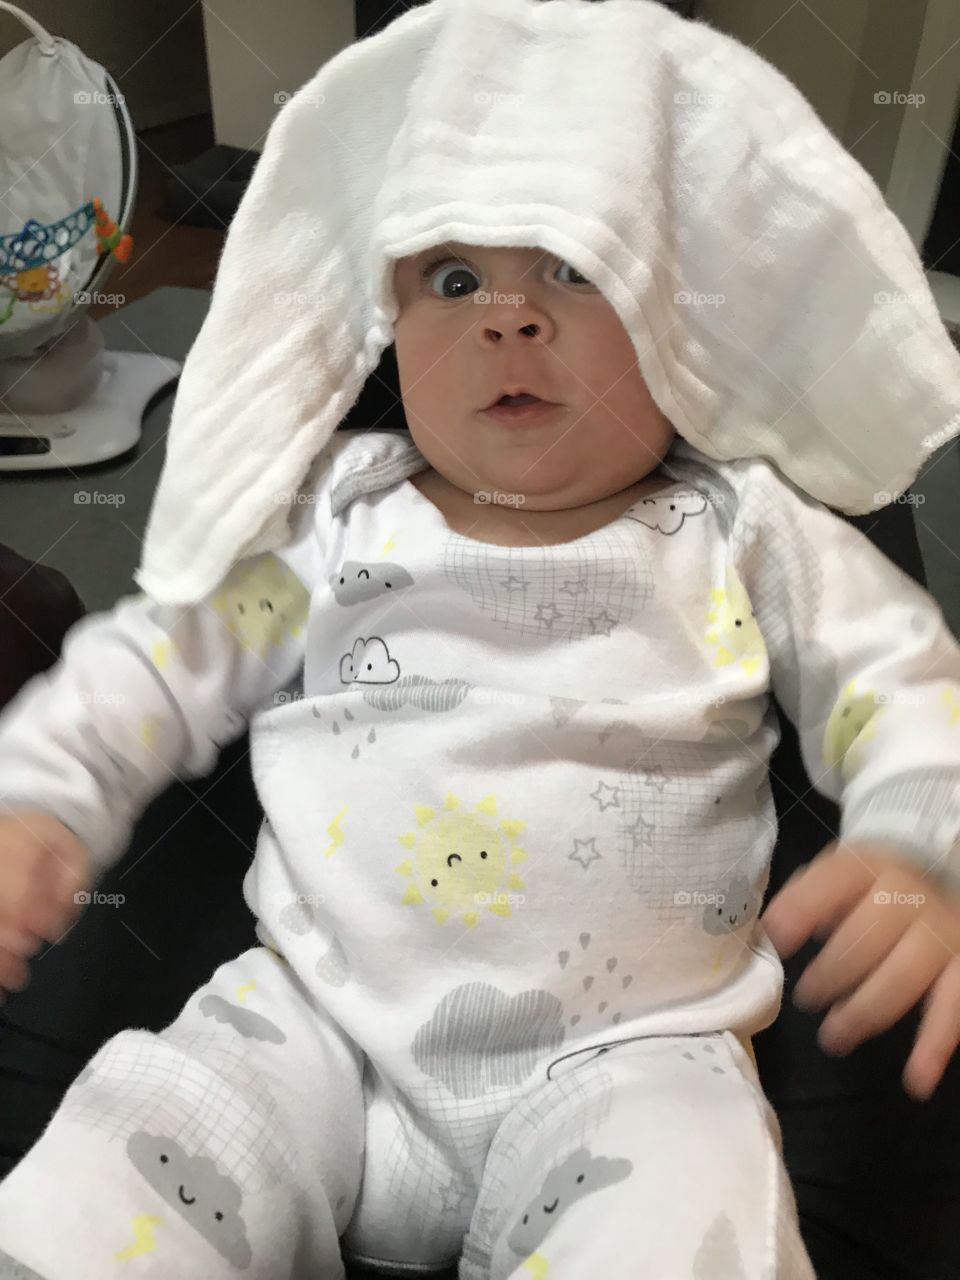 Surprised!! Wow, what's happening. Cute baby reacting to diaper placed on his head. 